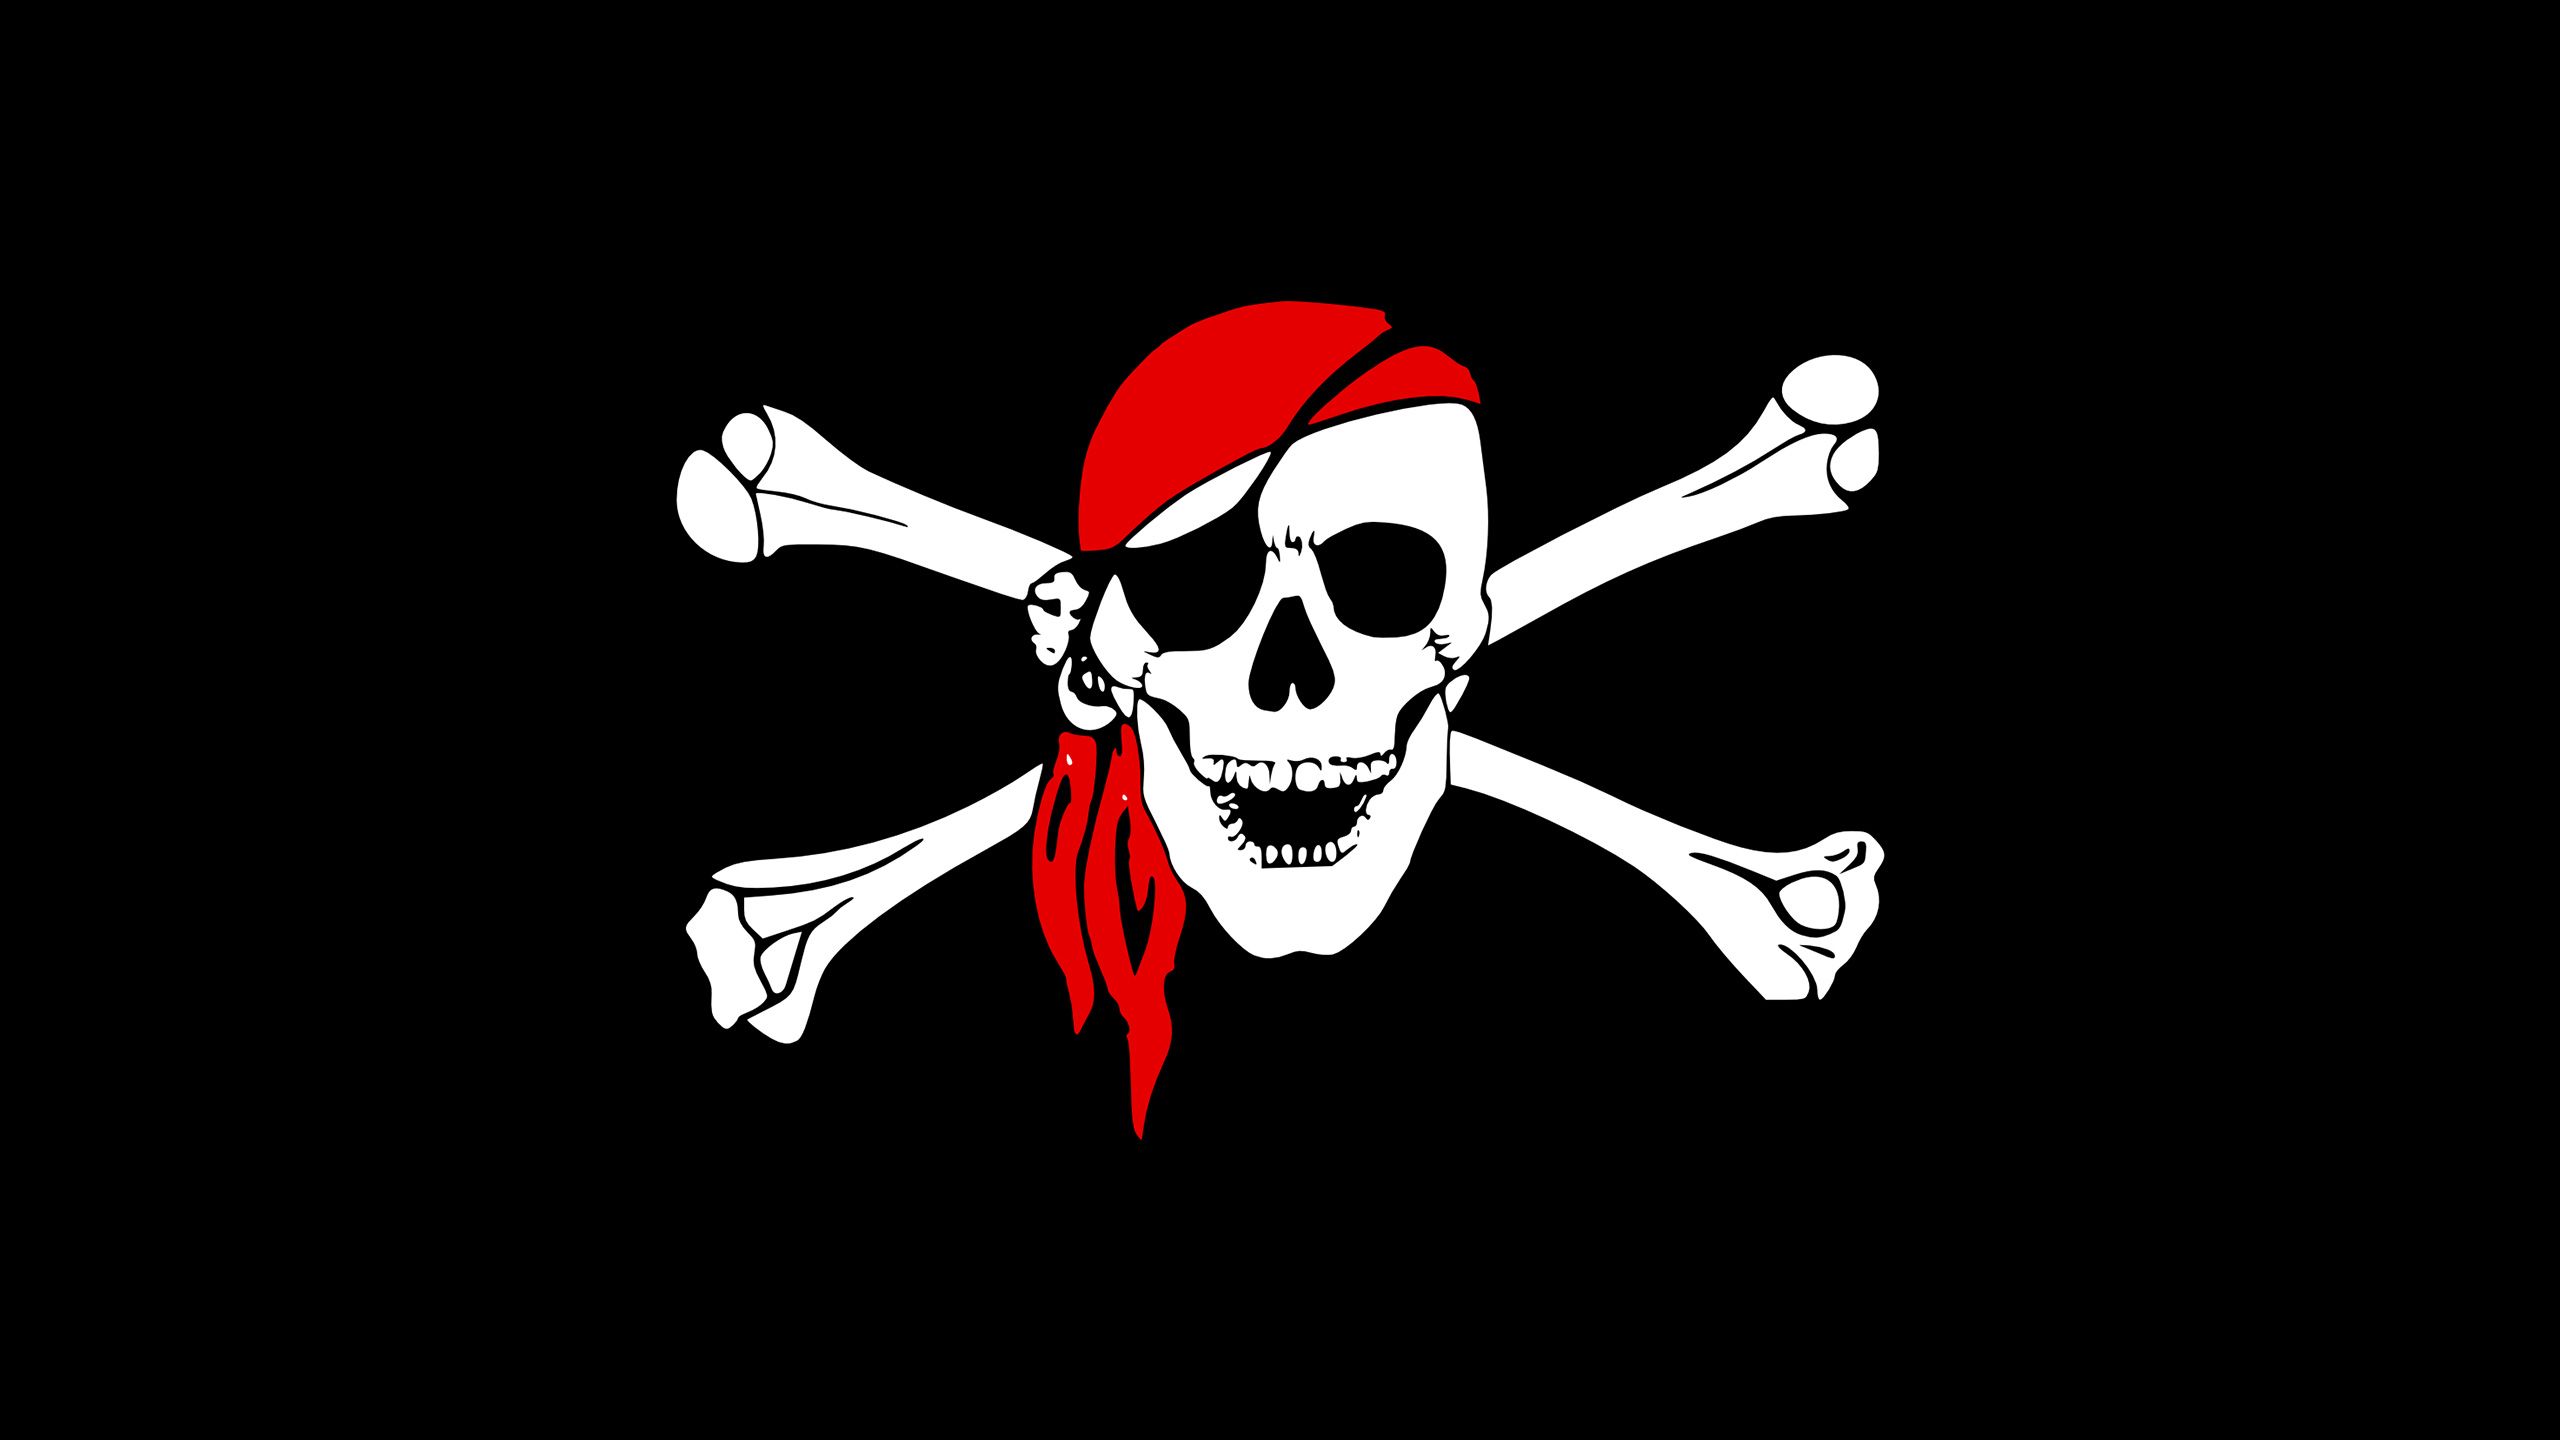 Pirate Flag Wallpaper Free Pirate Flag Background